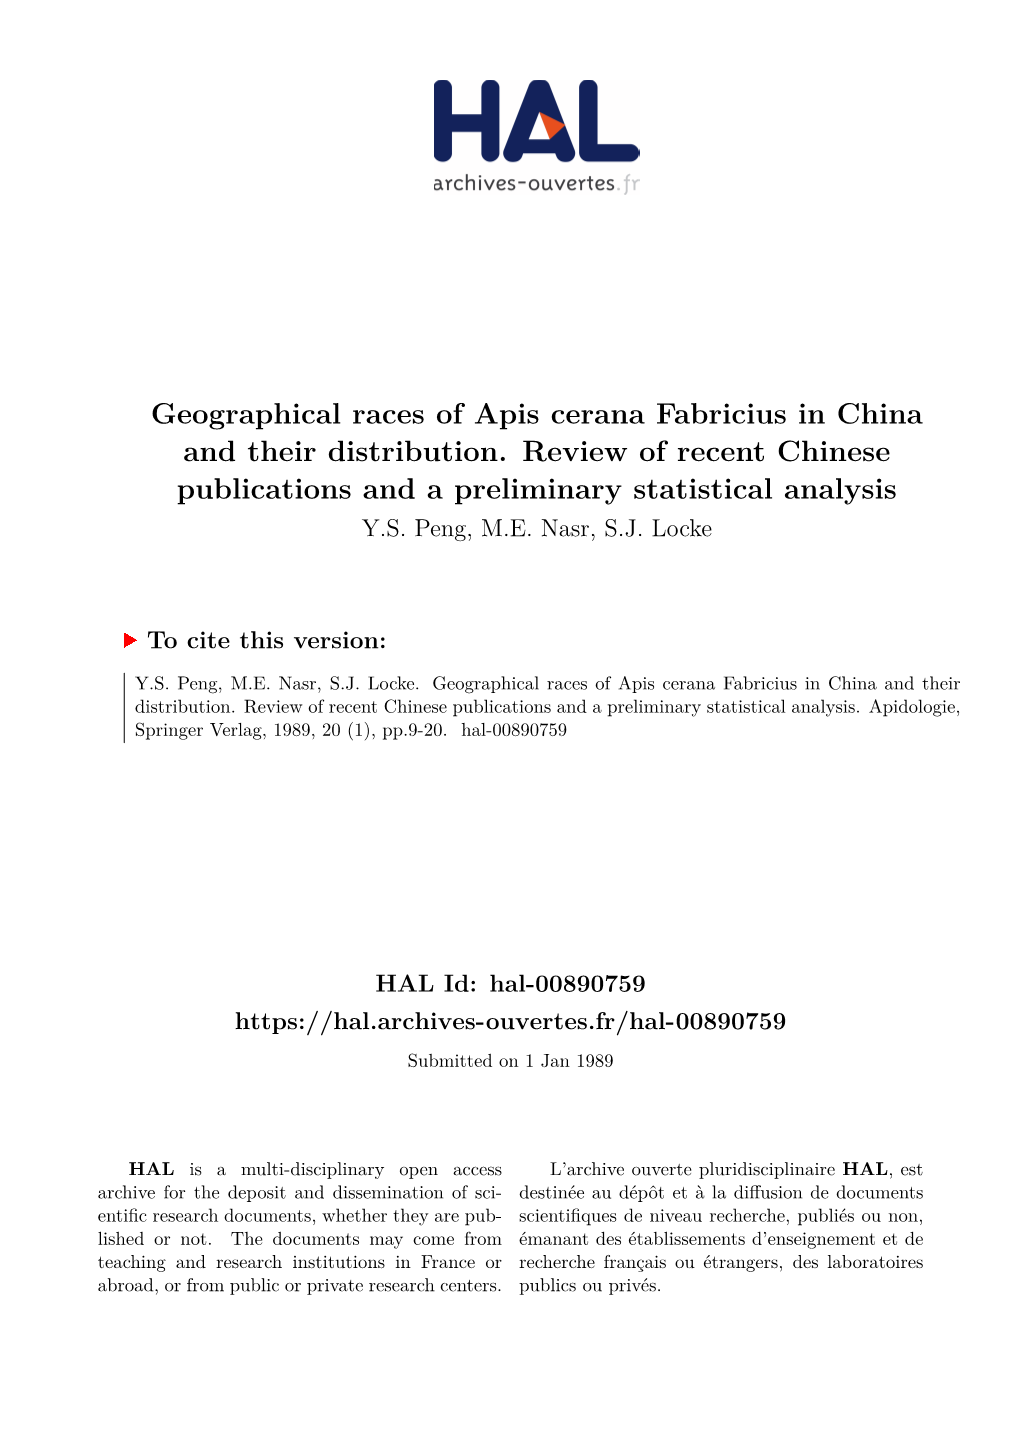 Geographical Races of Apis Cerana Fabricius in China and Their Distribution